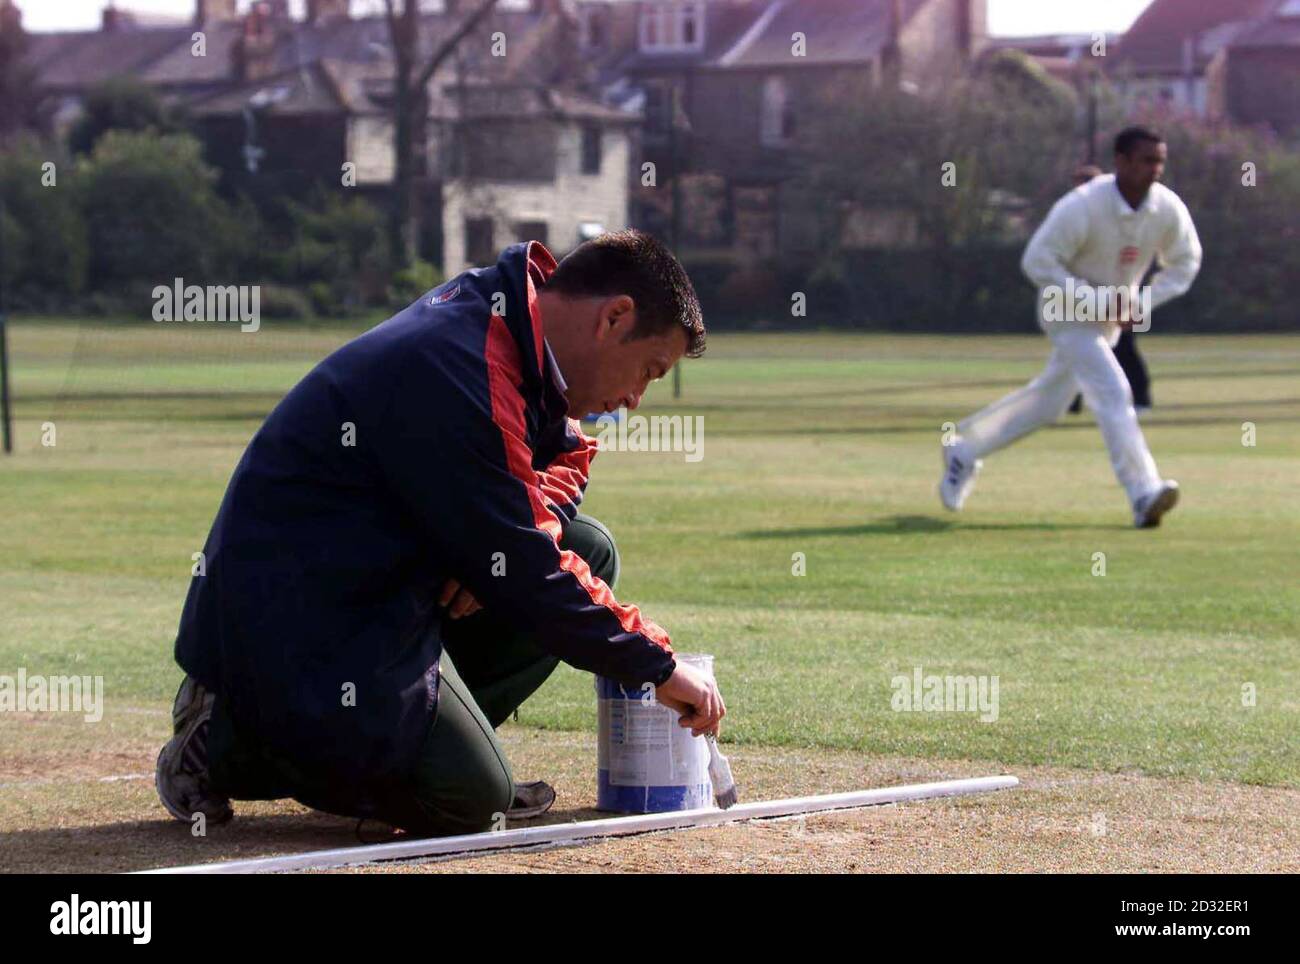 The John Moden Head Groundsman prepares the pitch at Fenners cricket ground, Cambridge, the home of Cambridge University cricket Club ahead of the start of the season which begins Cambridge UCCE will be playing Middlesex . Stock Photo